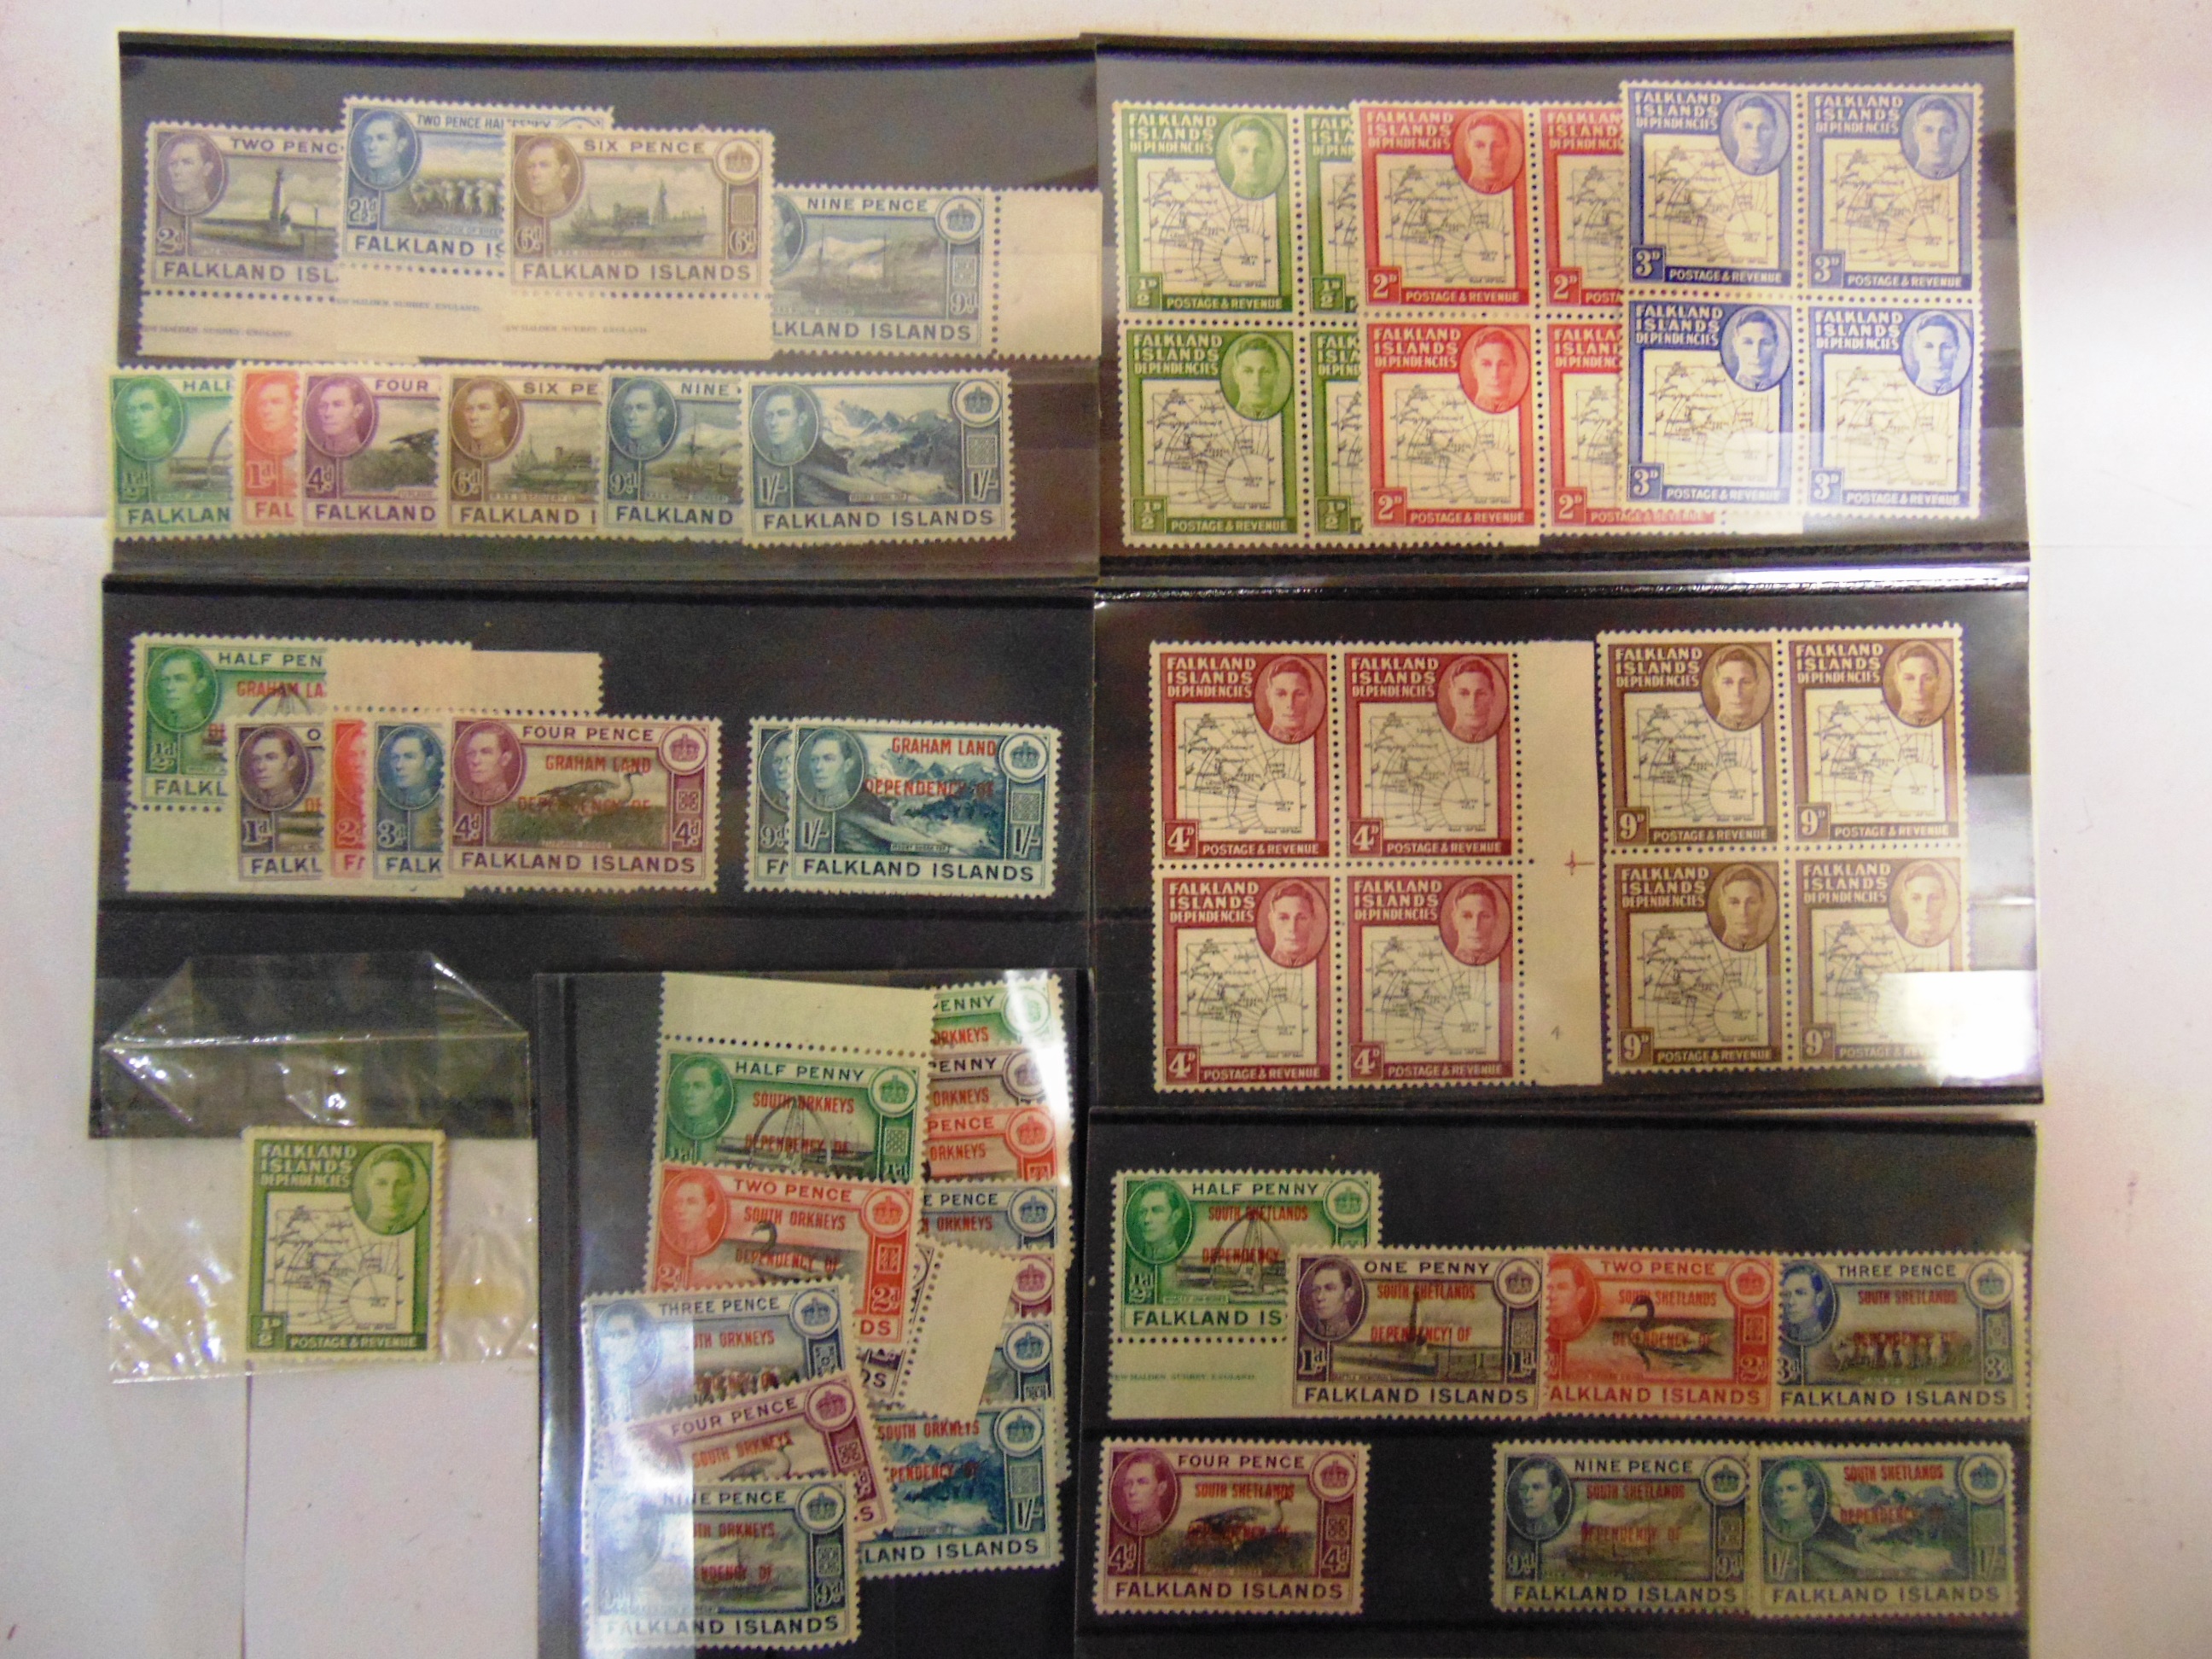 STAMPS - A PART-WORLD COLLECTION including Great Britain and British Commonwealth, mint and used ( - Image 3 of 4